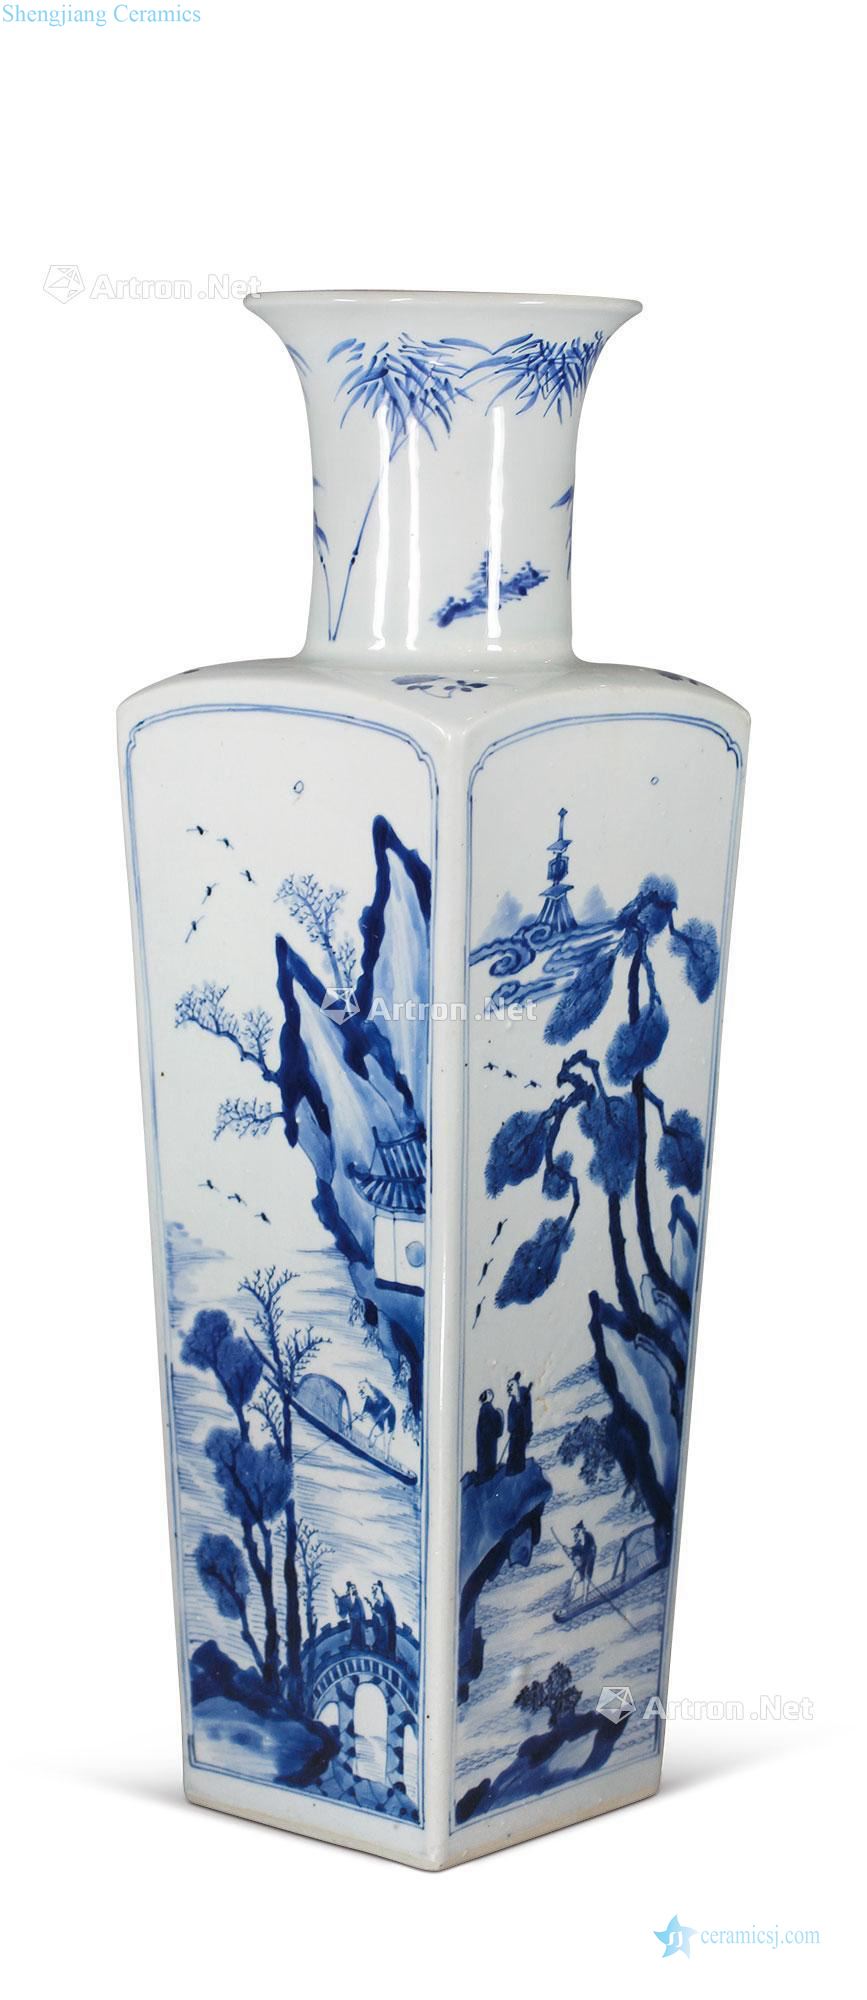 The qing emperor kangxi Blue and white literary figure bottles